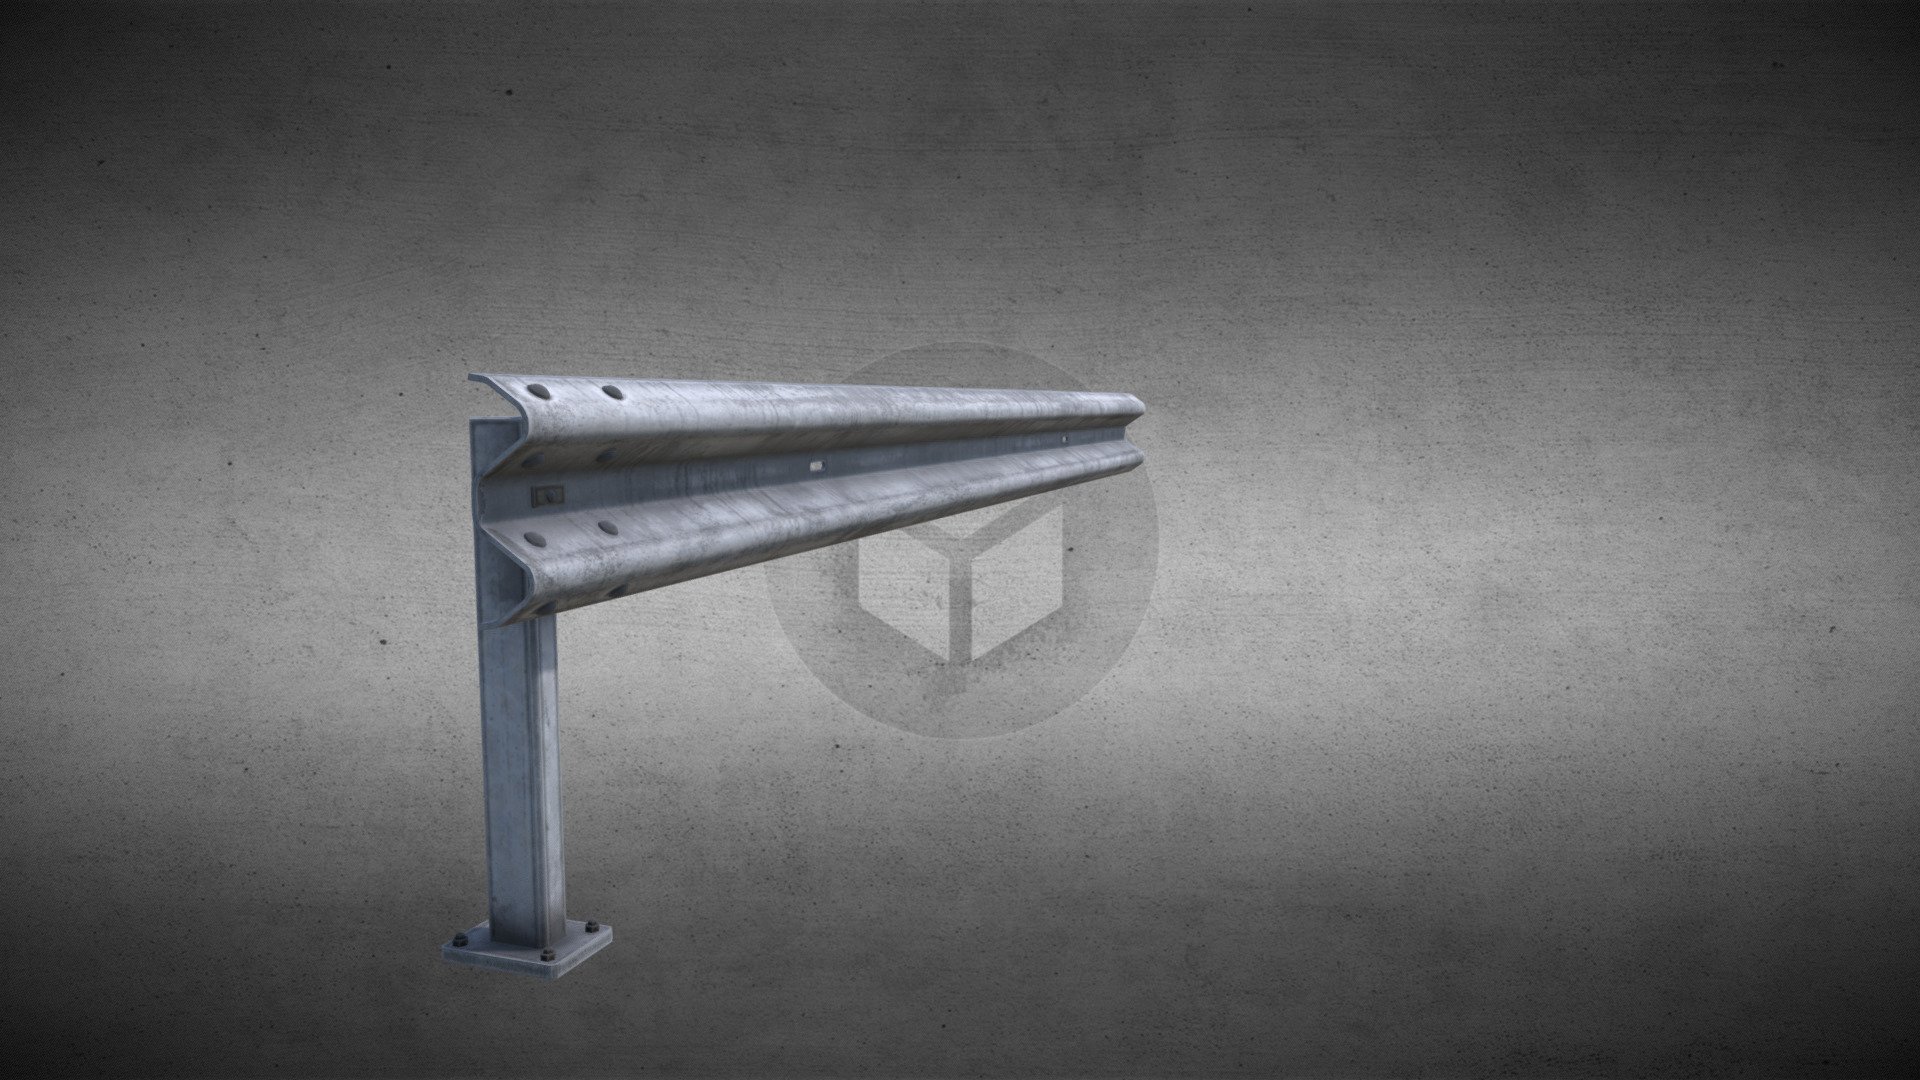 This 3D guardrail is part of the Swiss and French Autobahn Asset Pack for the Unreal Engine. The 3D model includes LODs, Collision and PBR/ORM textures in the Marketplace.

Check it out &gt; https://www.unrealengine.com/marketplace/en-US/product/european-collection-swiss-highway - Guardrail / Schutzplanke / Leitplanke - 3D model by DerSky 3d model